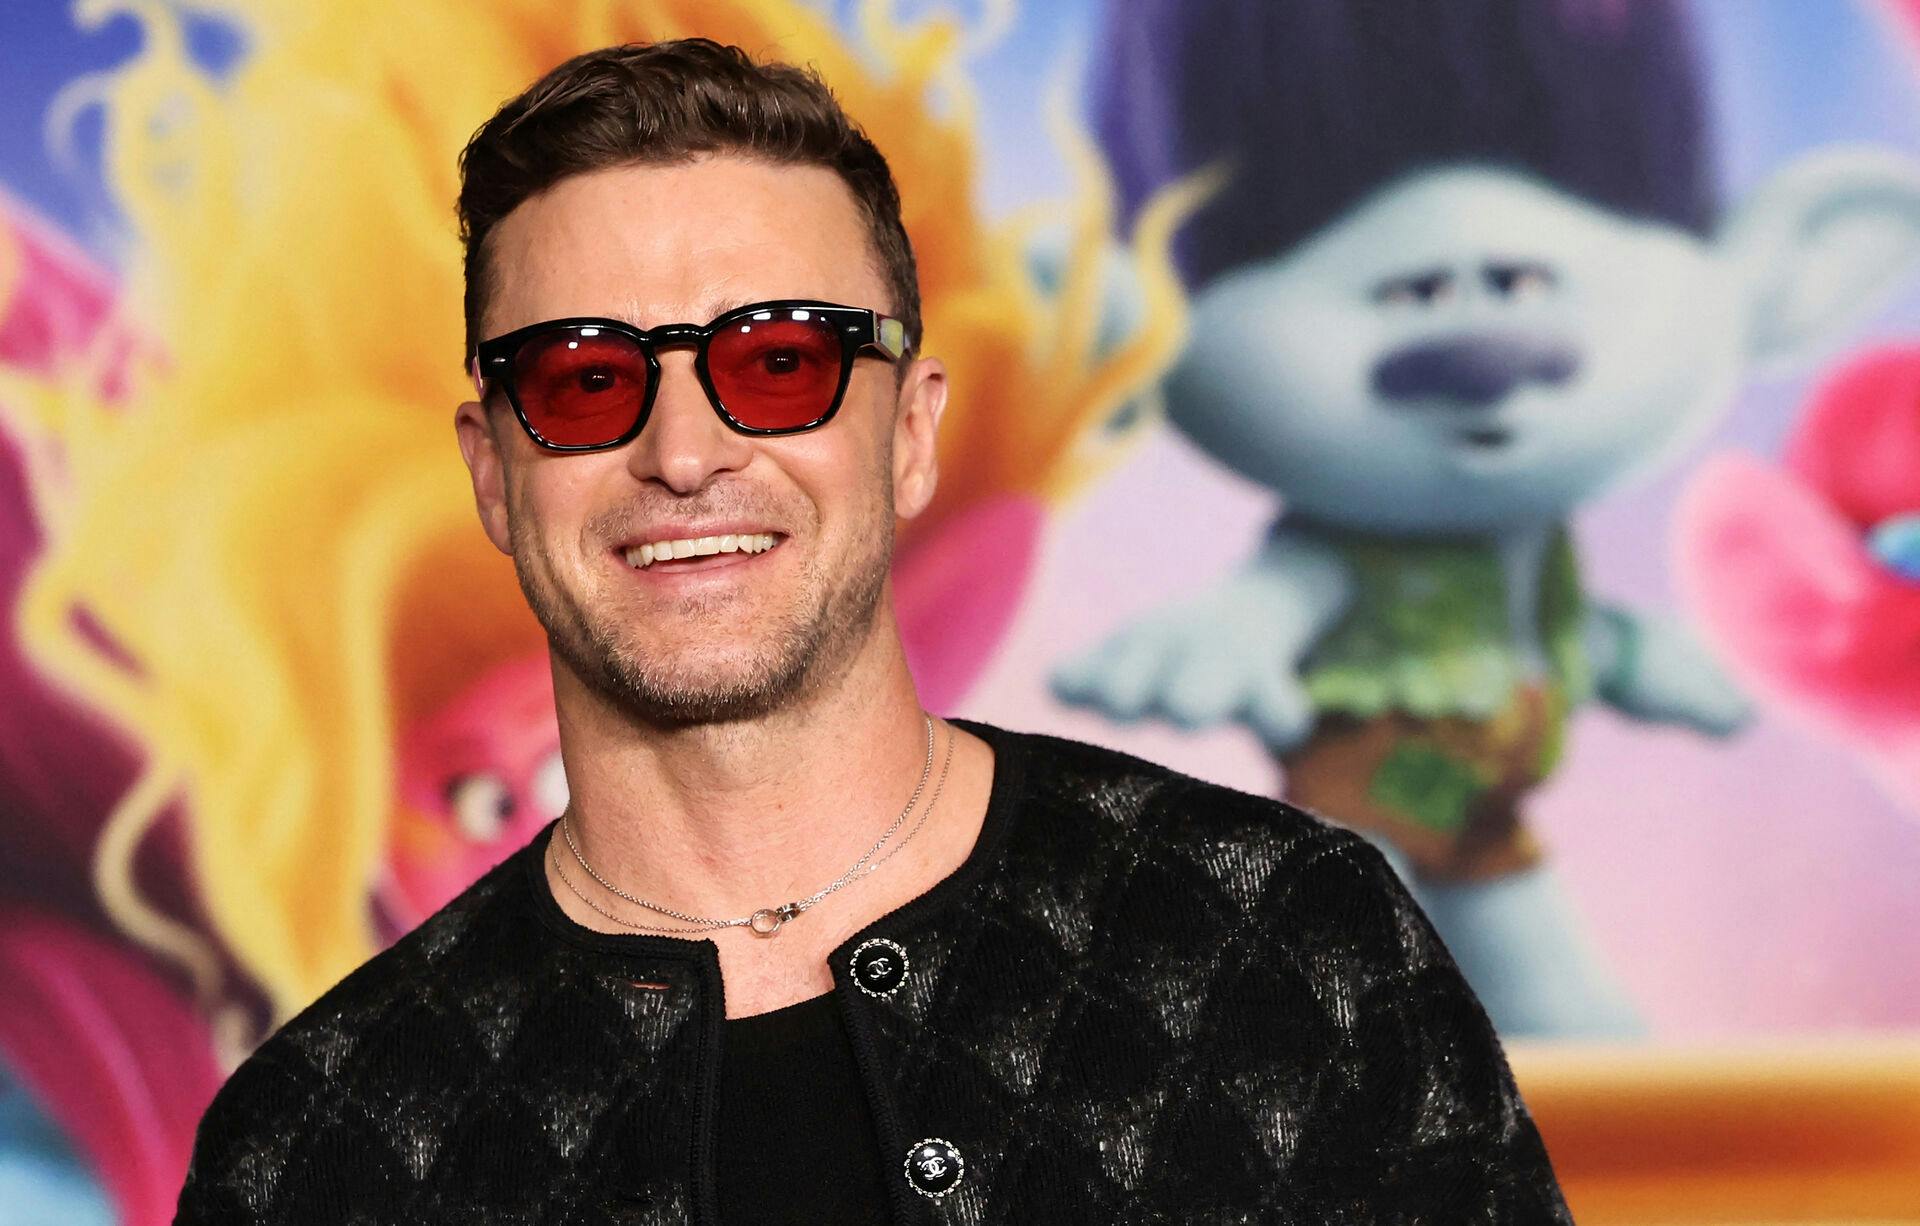 Cast member Justin Timberlake attends a photo call for a special screening of "Trolls Band Together" in Los Angeles, California, U.S., November 15, 2023. REUTERS/Mario Anzuoni